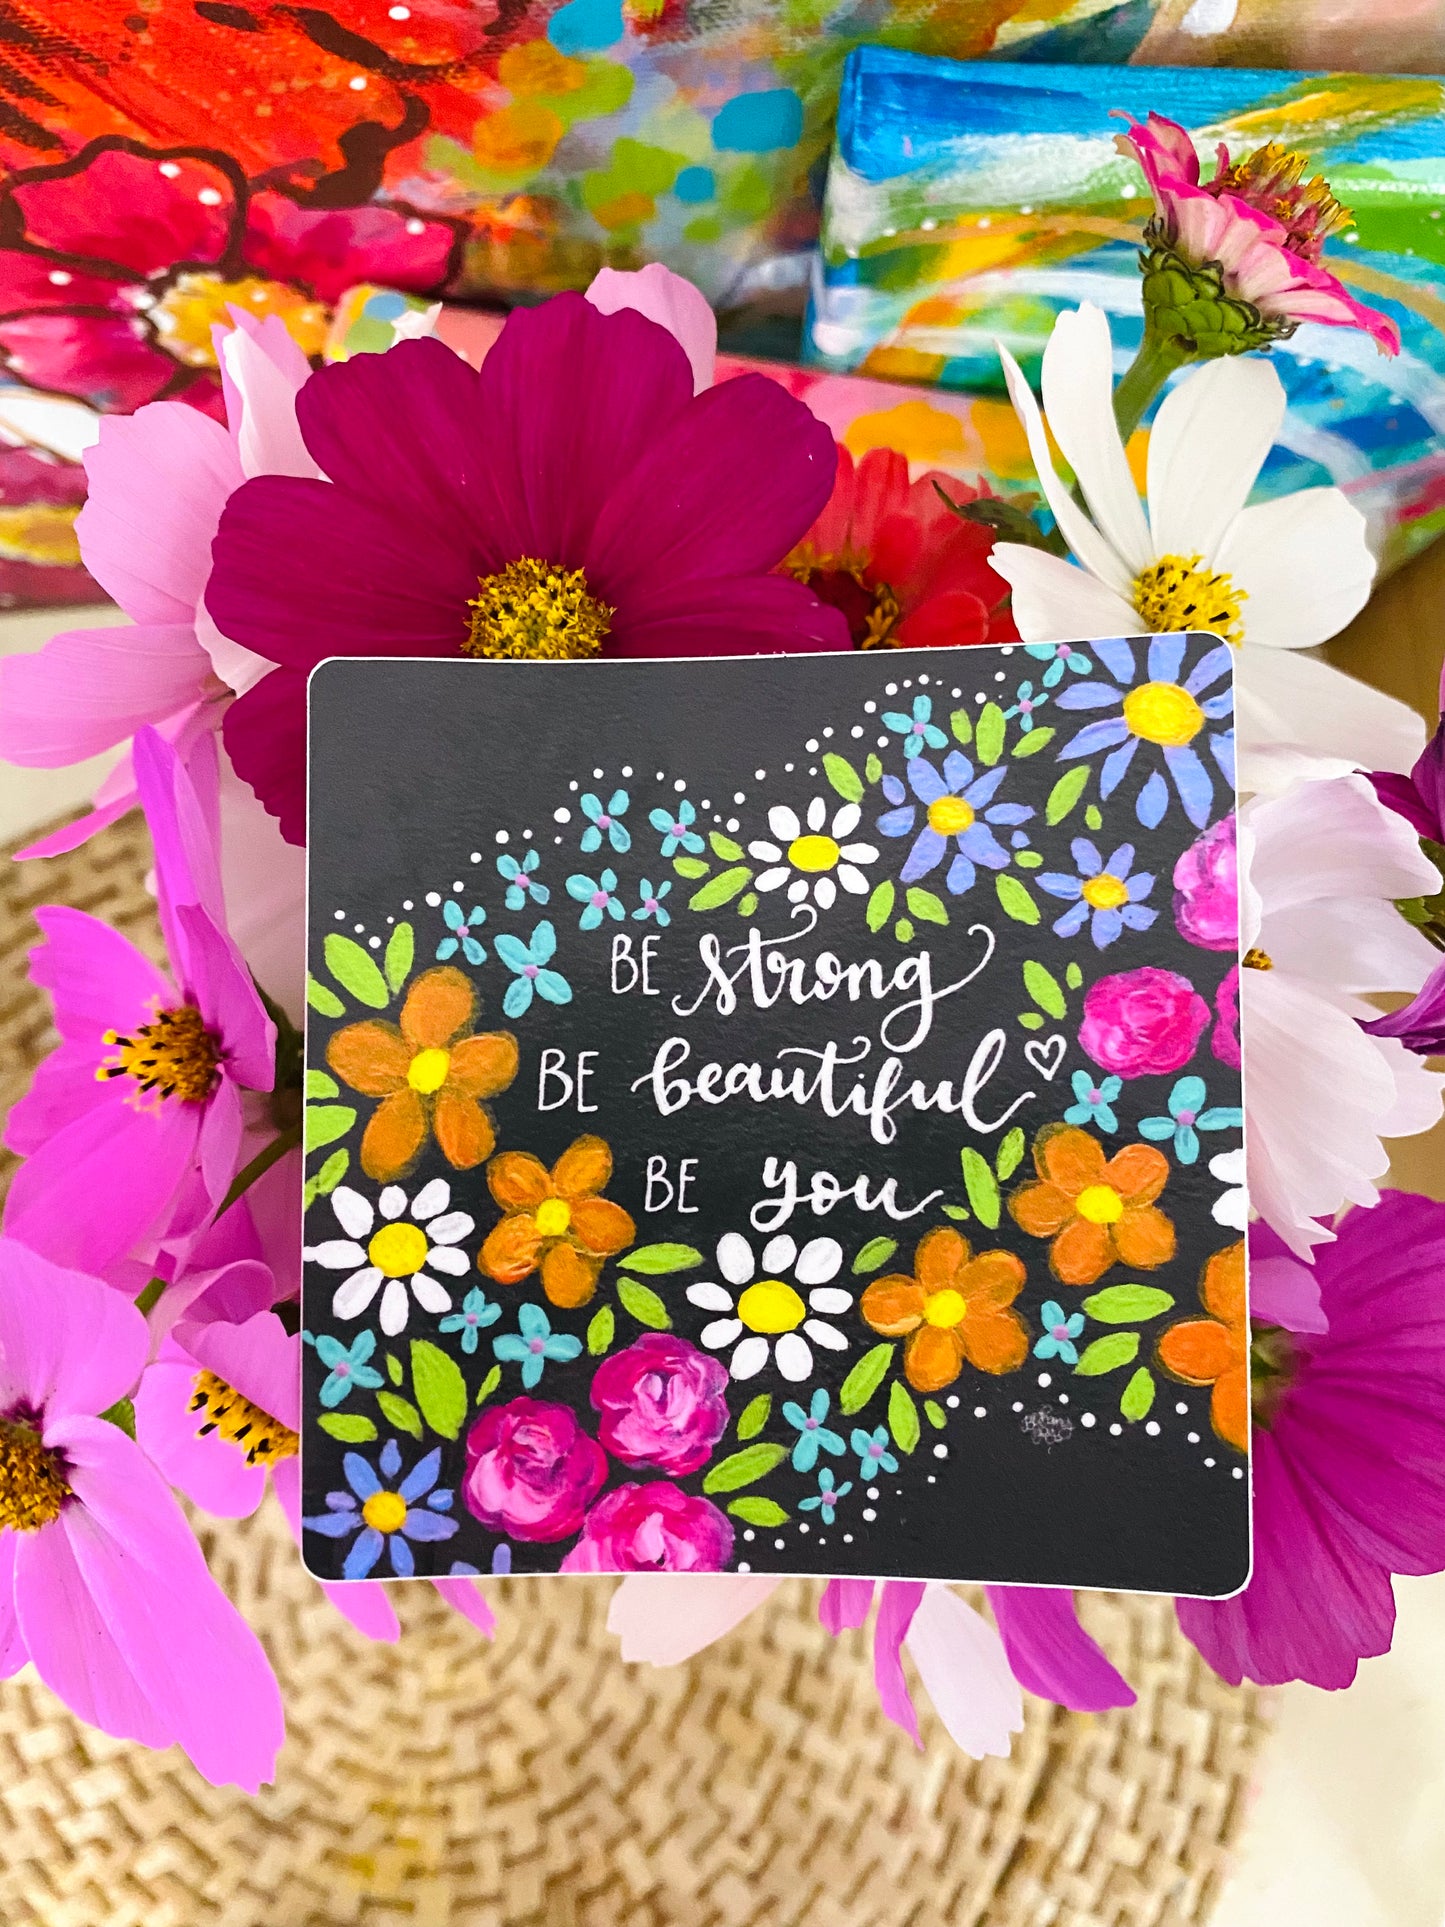 Beautiful You Floral Vinyl Sticker - October 2021 Sticker of the Month